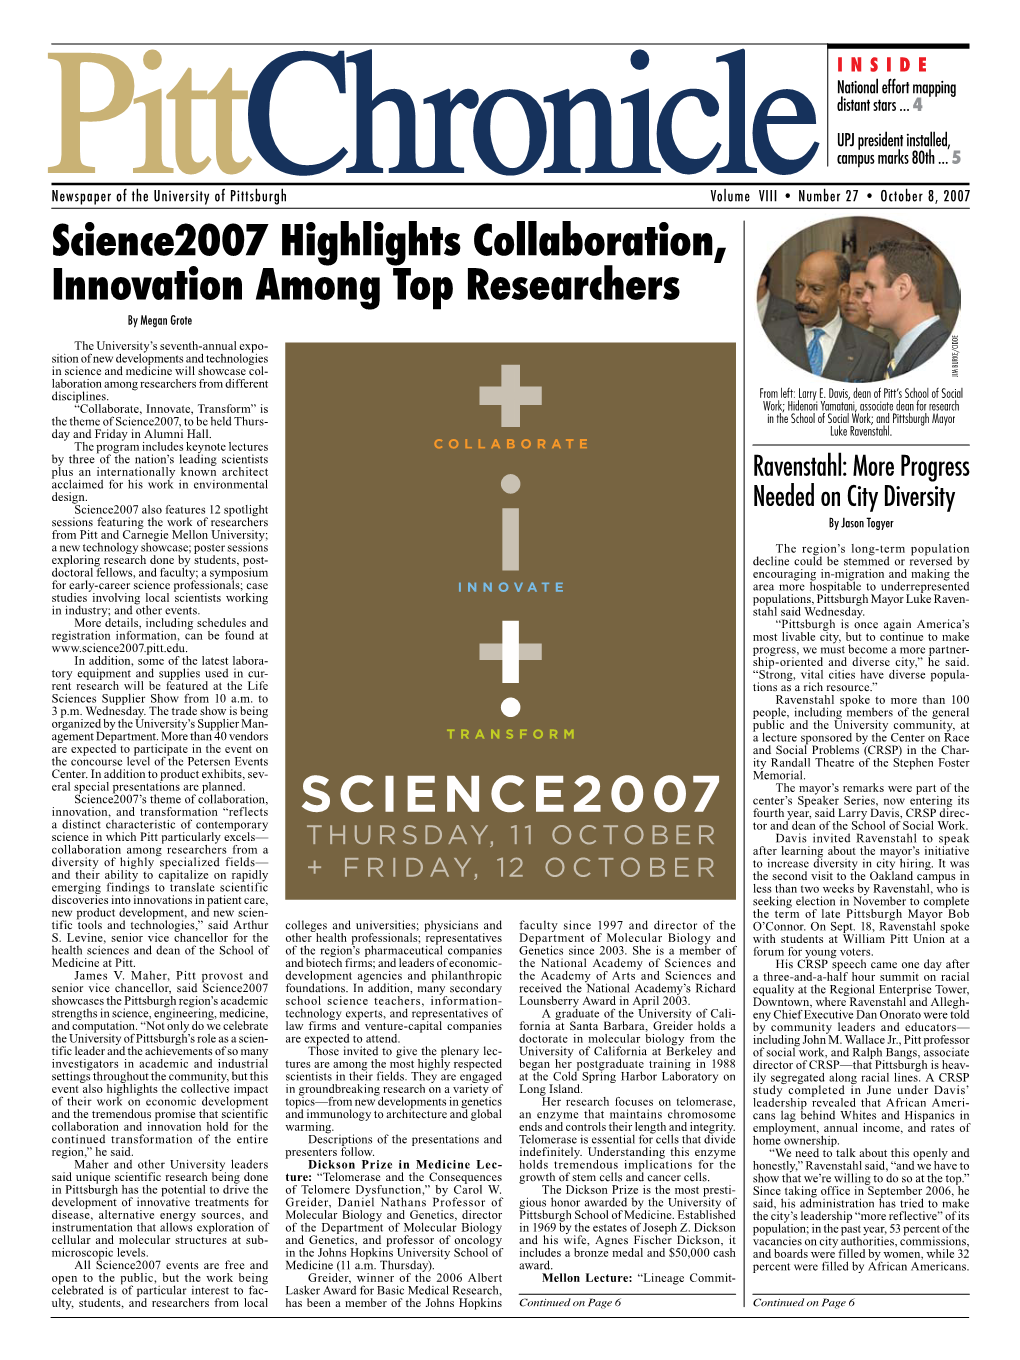 Science2007 Highlights Collaboration, Innovation Among Top Researchers by Megan Grote DDE I